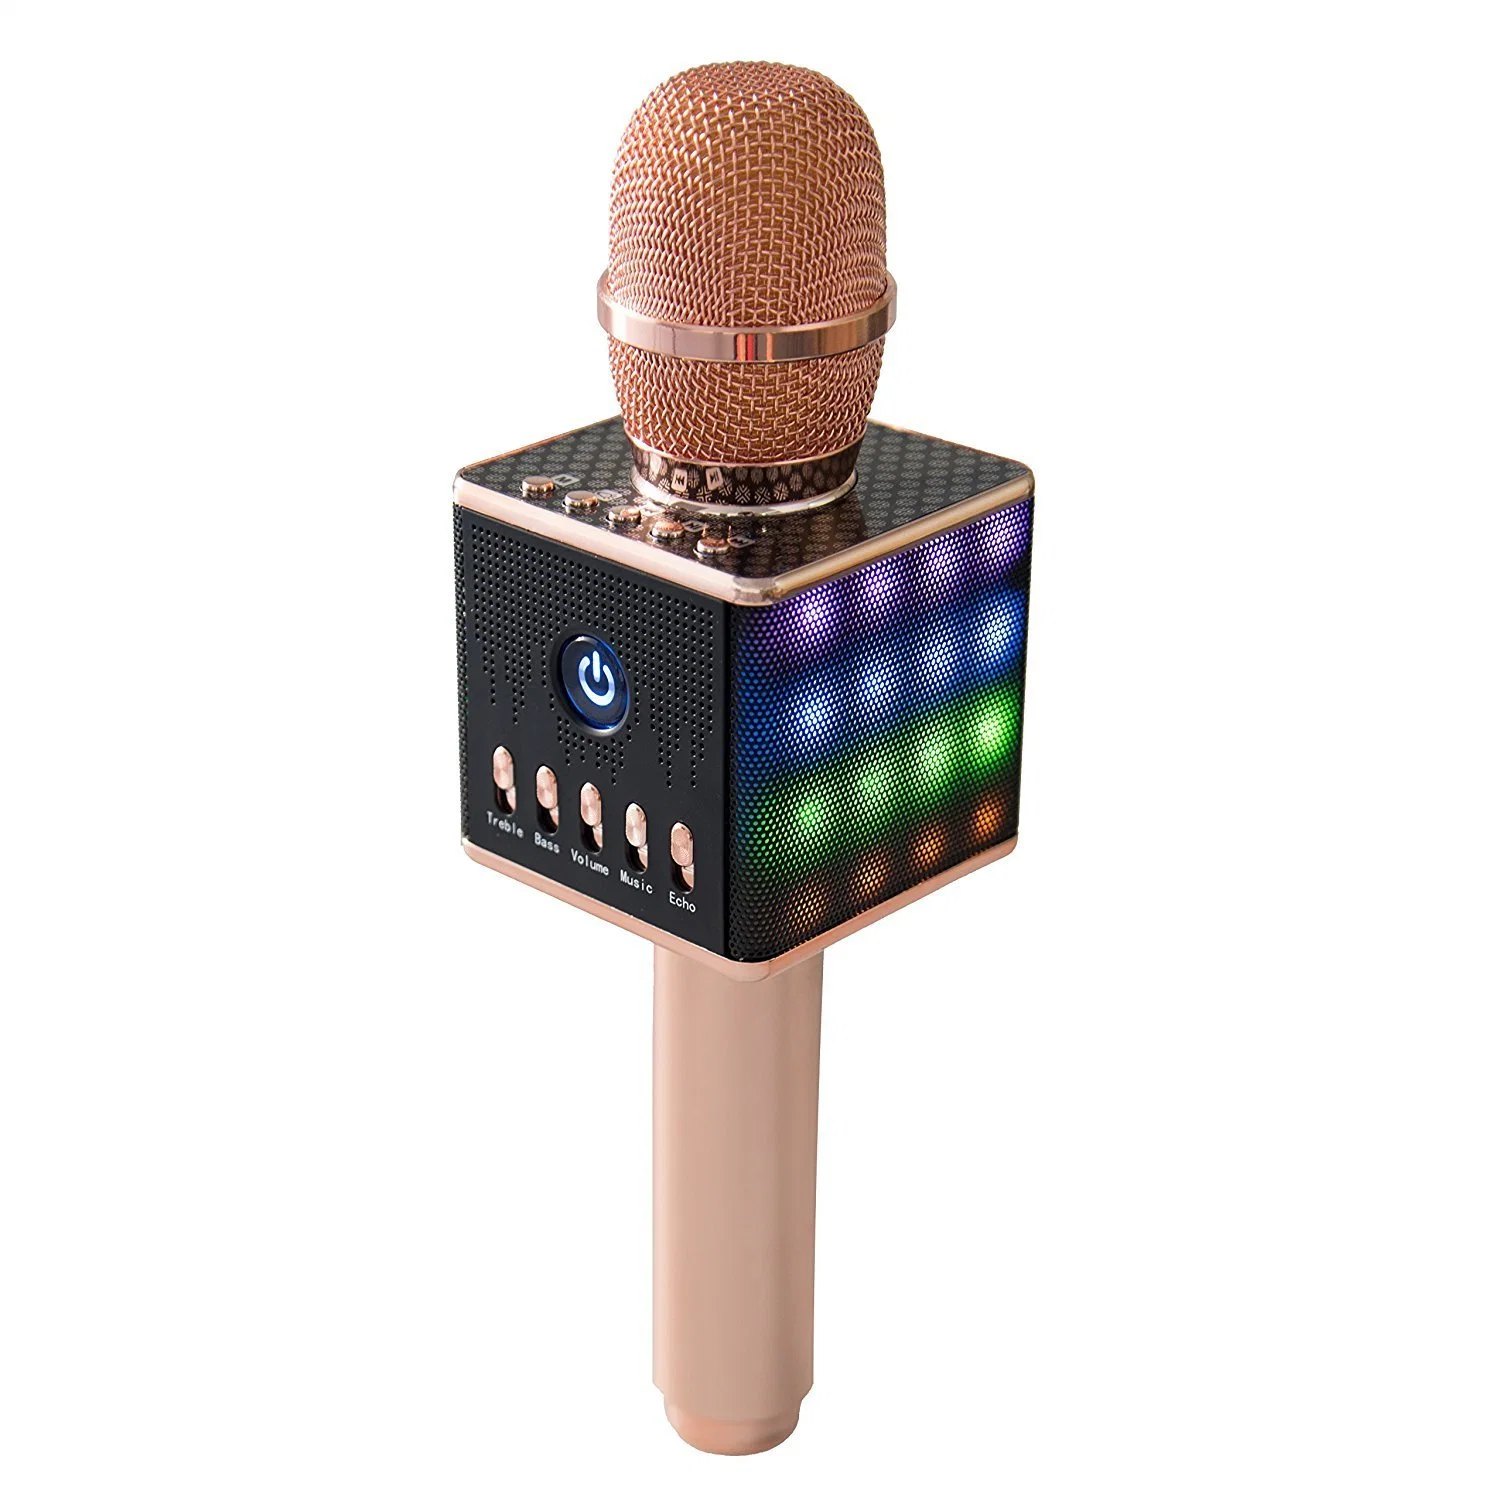 Handheld Dynamic Microphone Wireless Karaoke Music Player with LED Lights